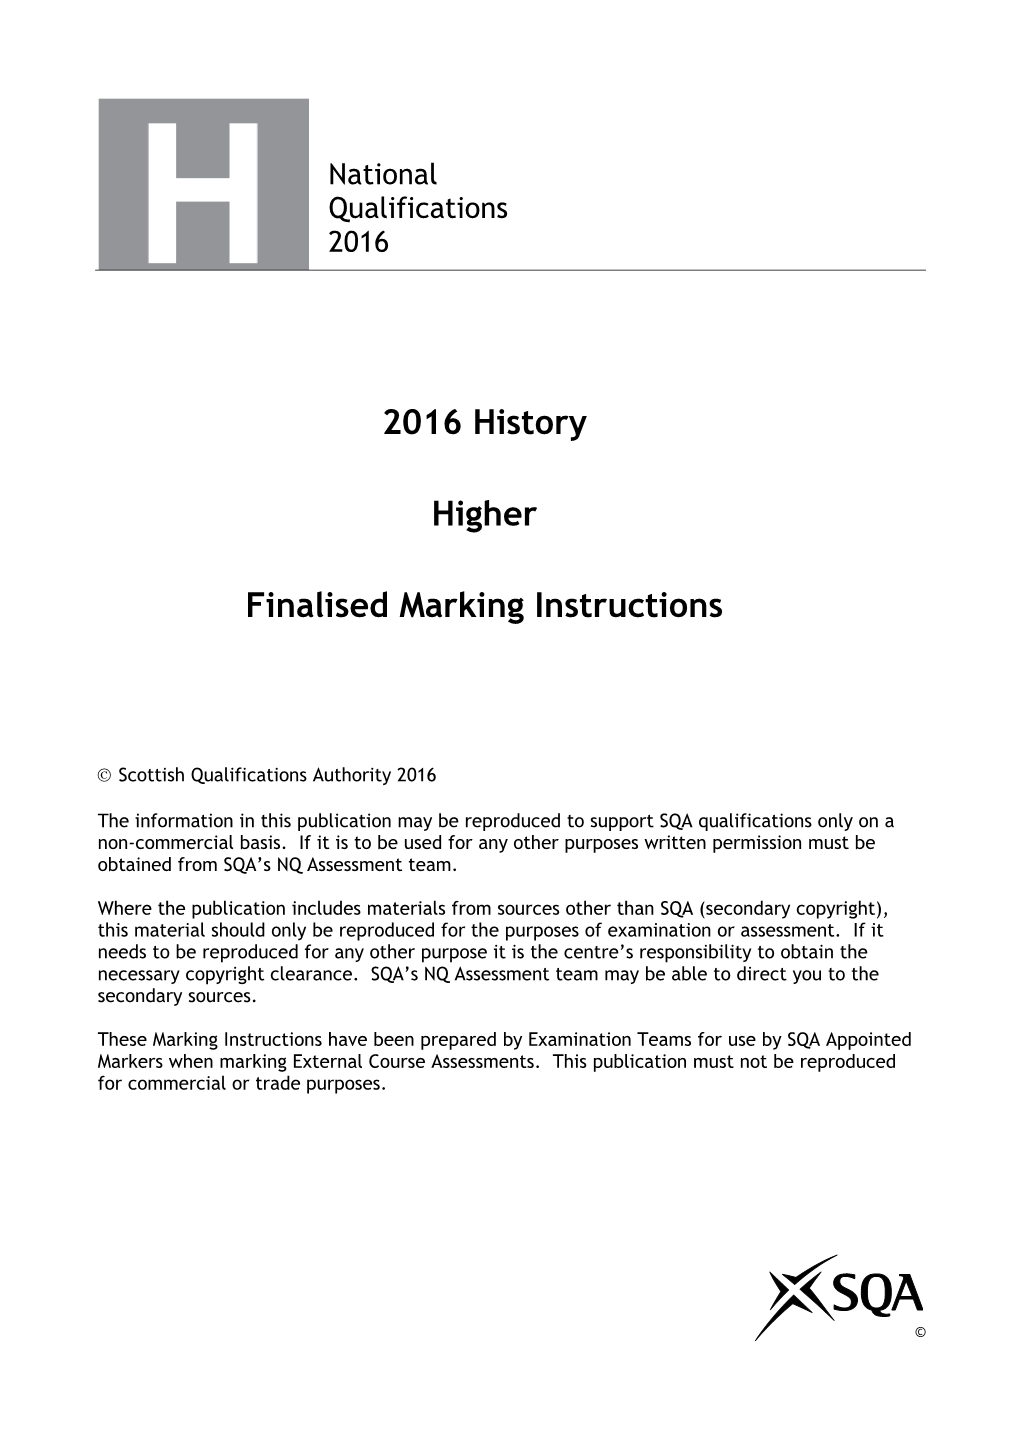 2016 History Higher Finalised Marking Instructions